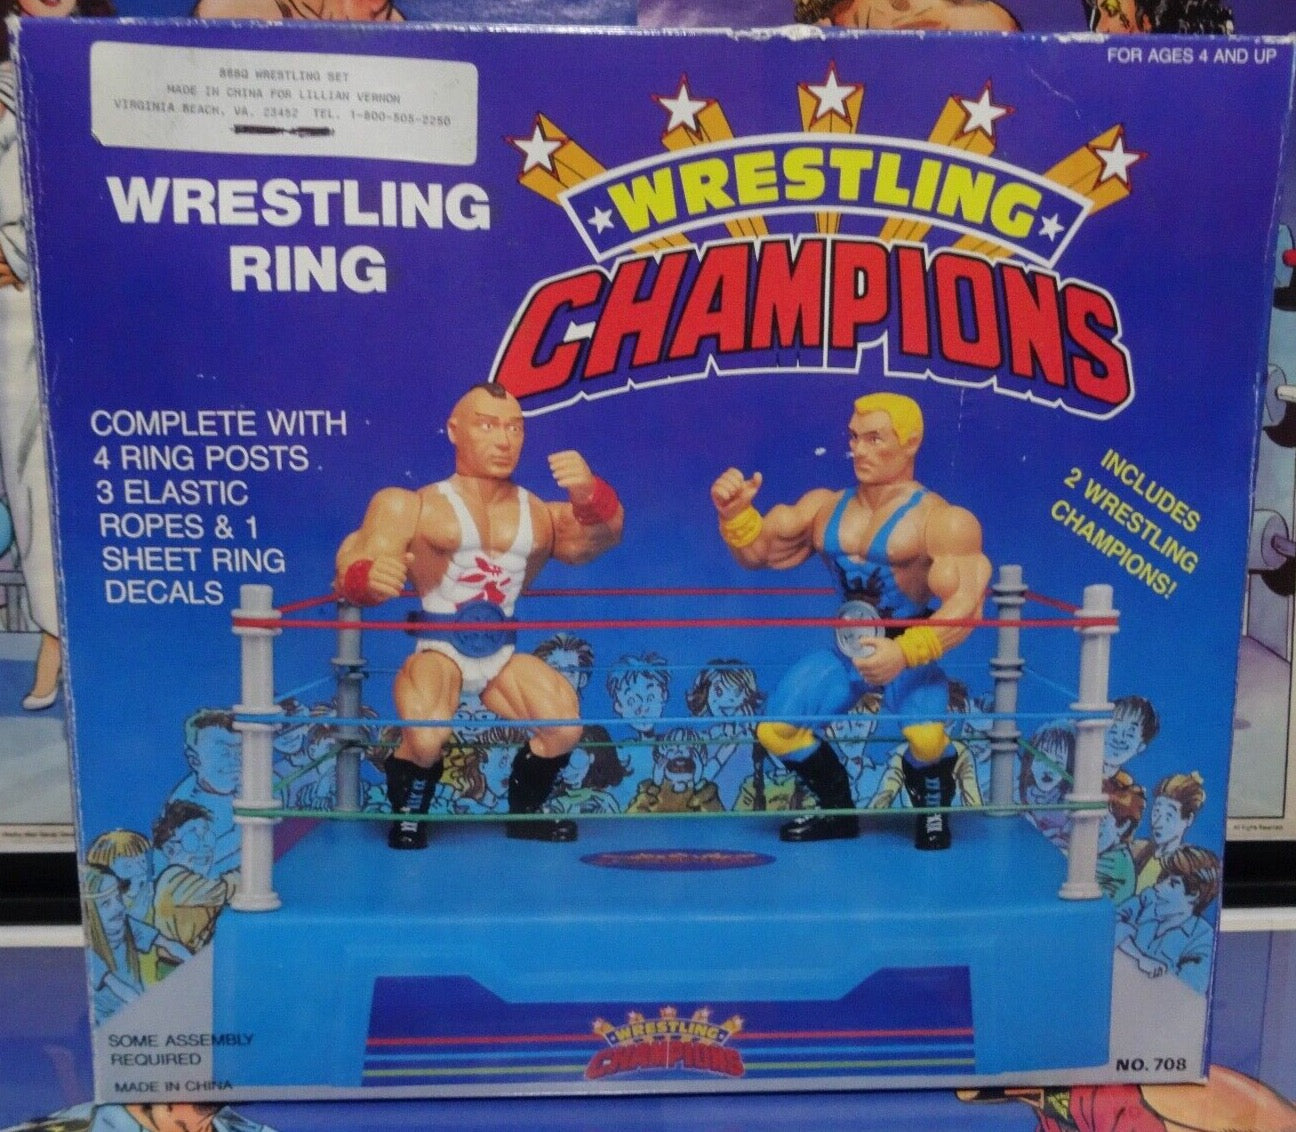 Wrestling Champions [Blue Card] Bootleg/Knockoff Figures